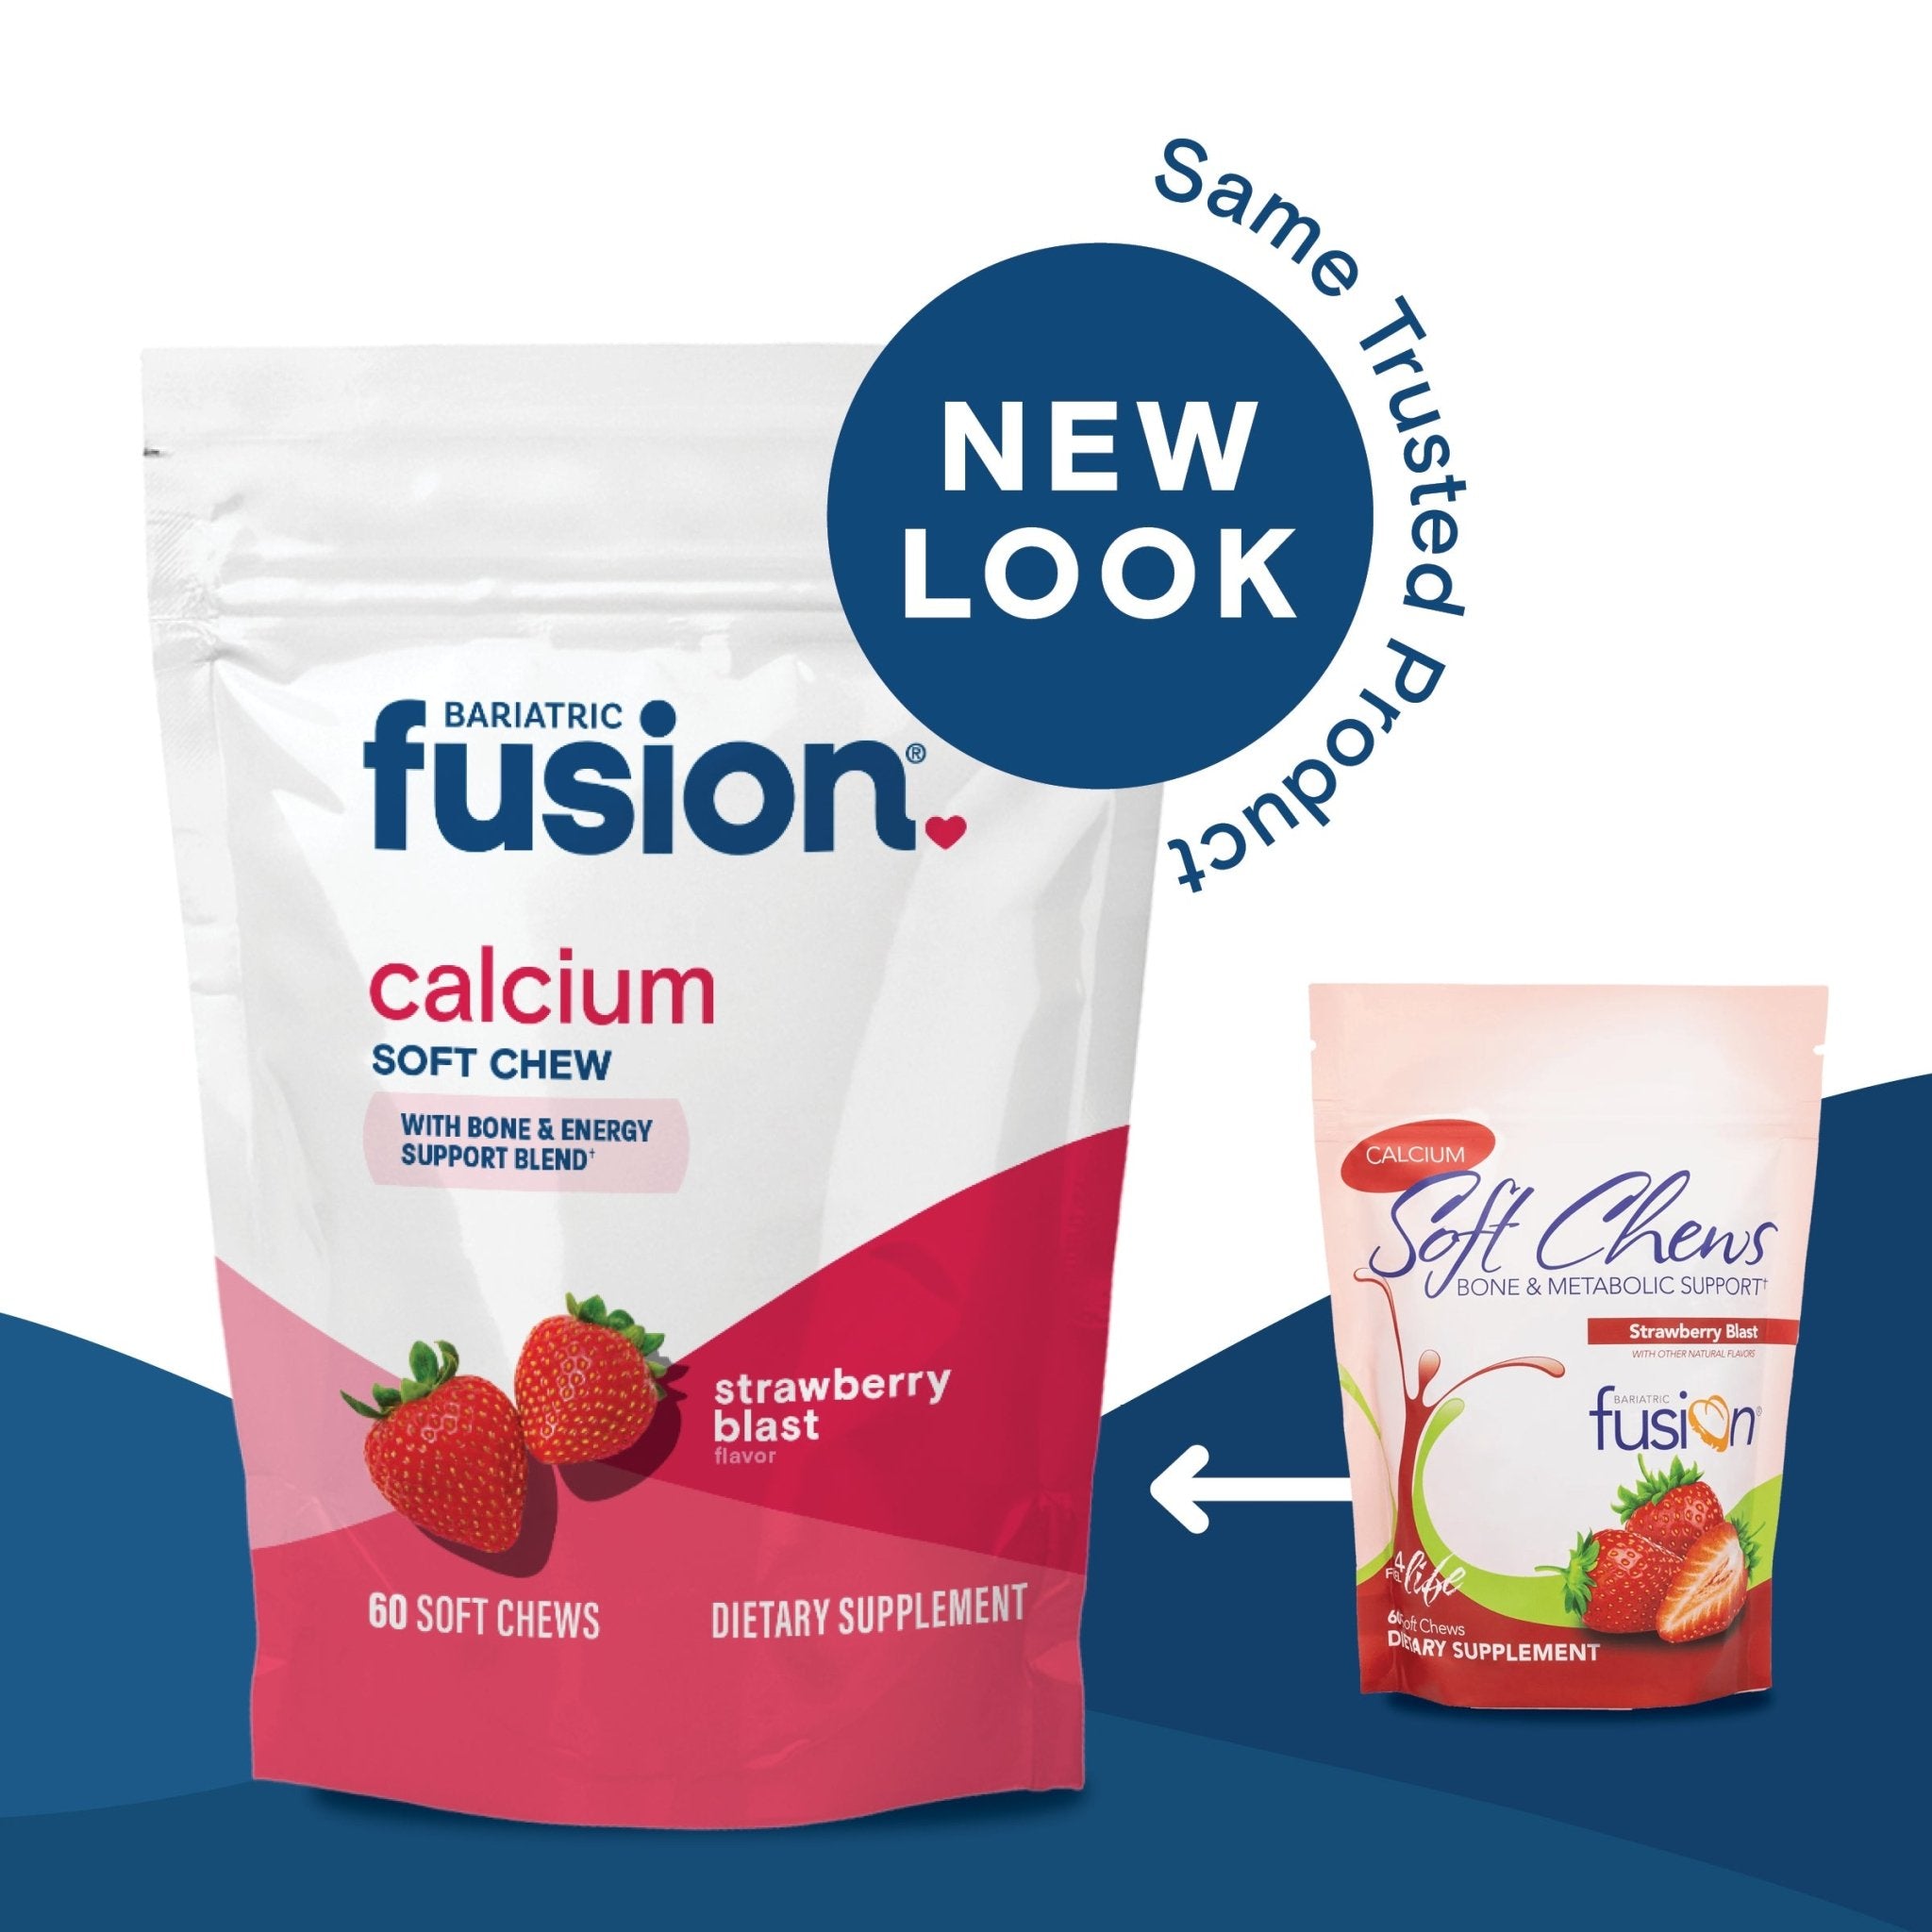 Strawberry Blast Bariatric Calcium Citrate Soft Chews new look, same trusted product.